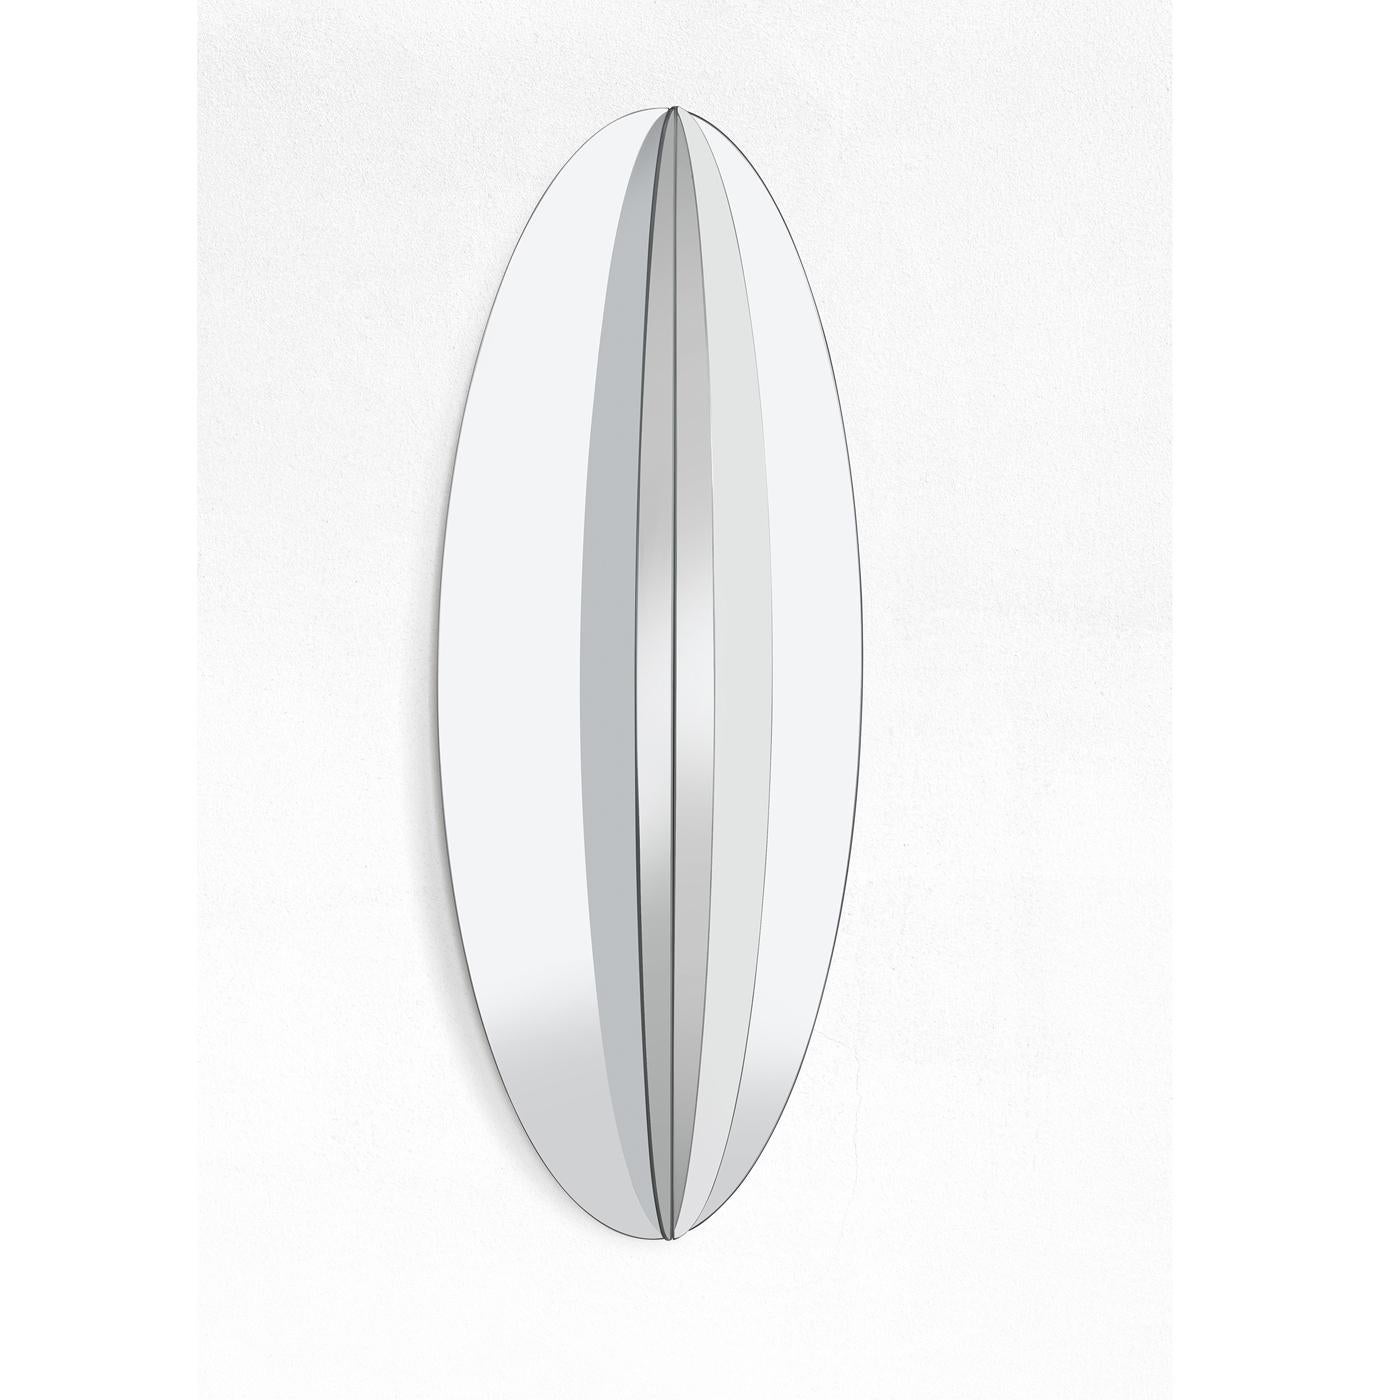 Part of a series of stunning mirrors of strong visual impact, this piece was designed by Marco Brunori for Adele C. Its oblong silhouette is made of two reflecting surfaces and is supported by bent steel plate that was welded and lacquered in a